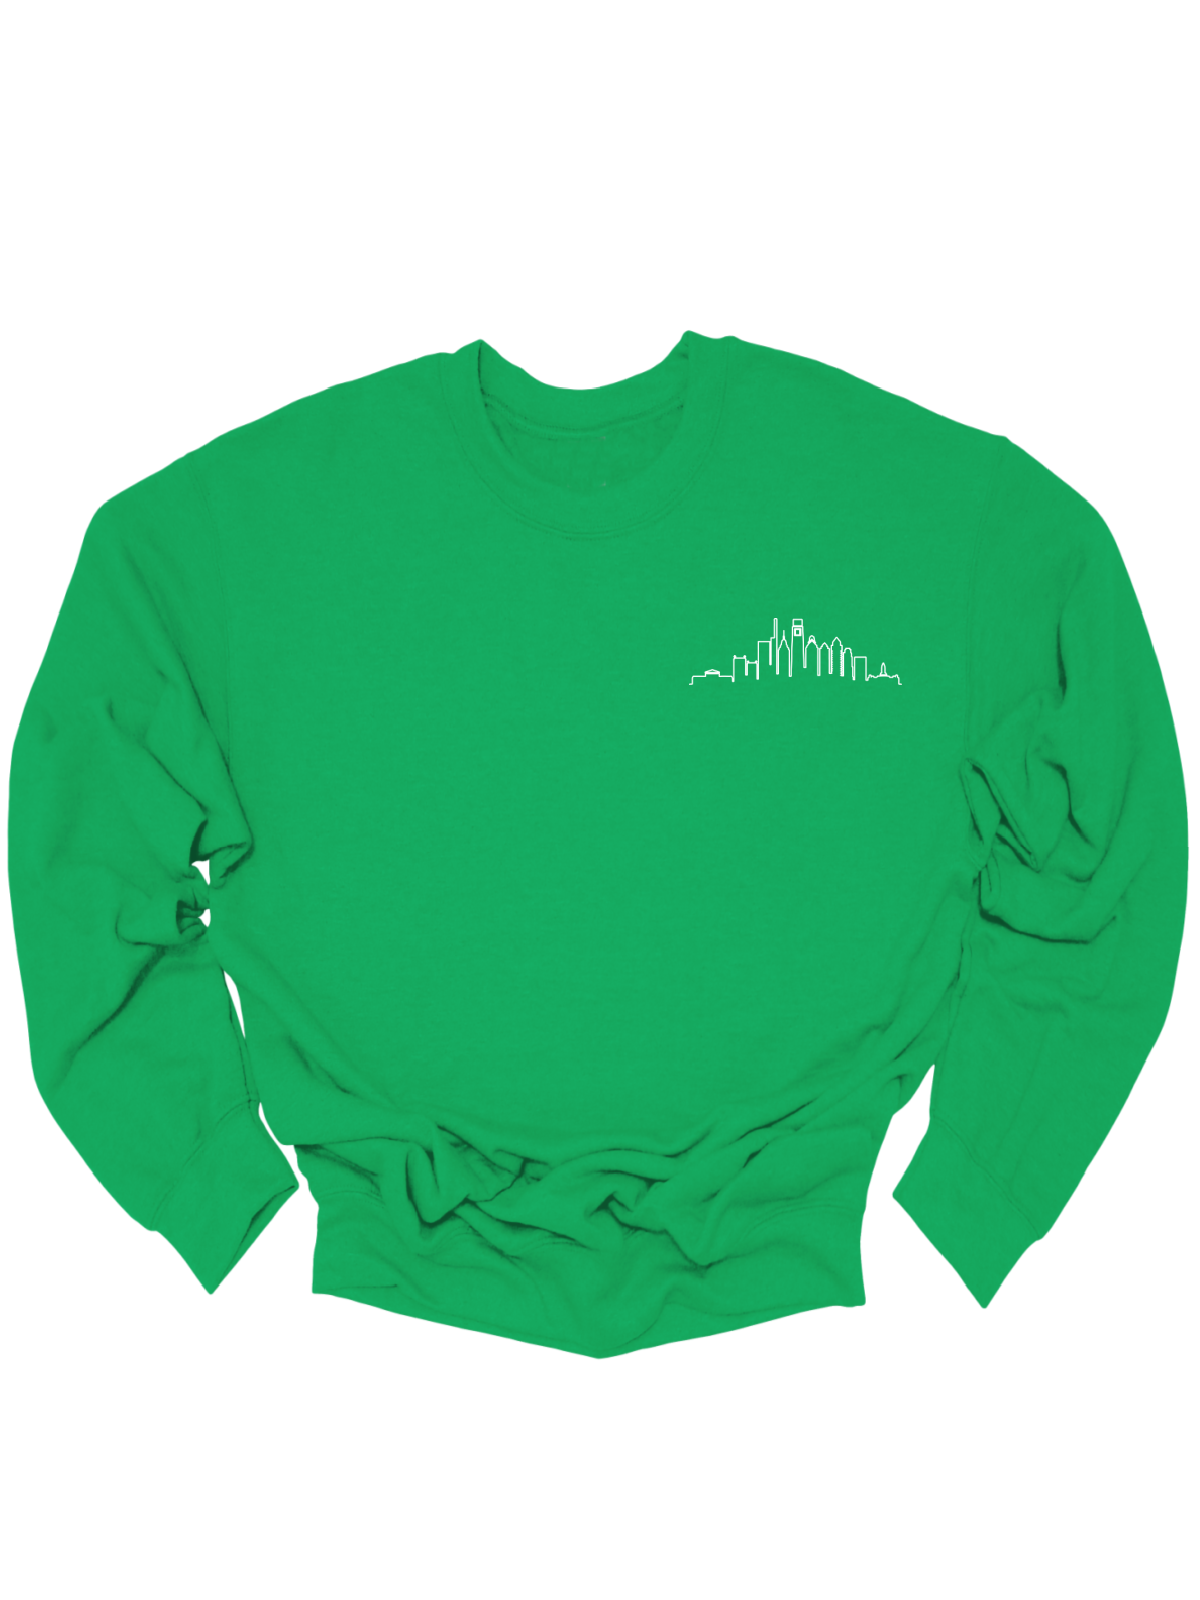 Philly Mom Sweatshirt in Kelly Green - Front